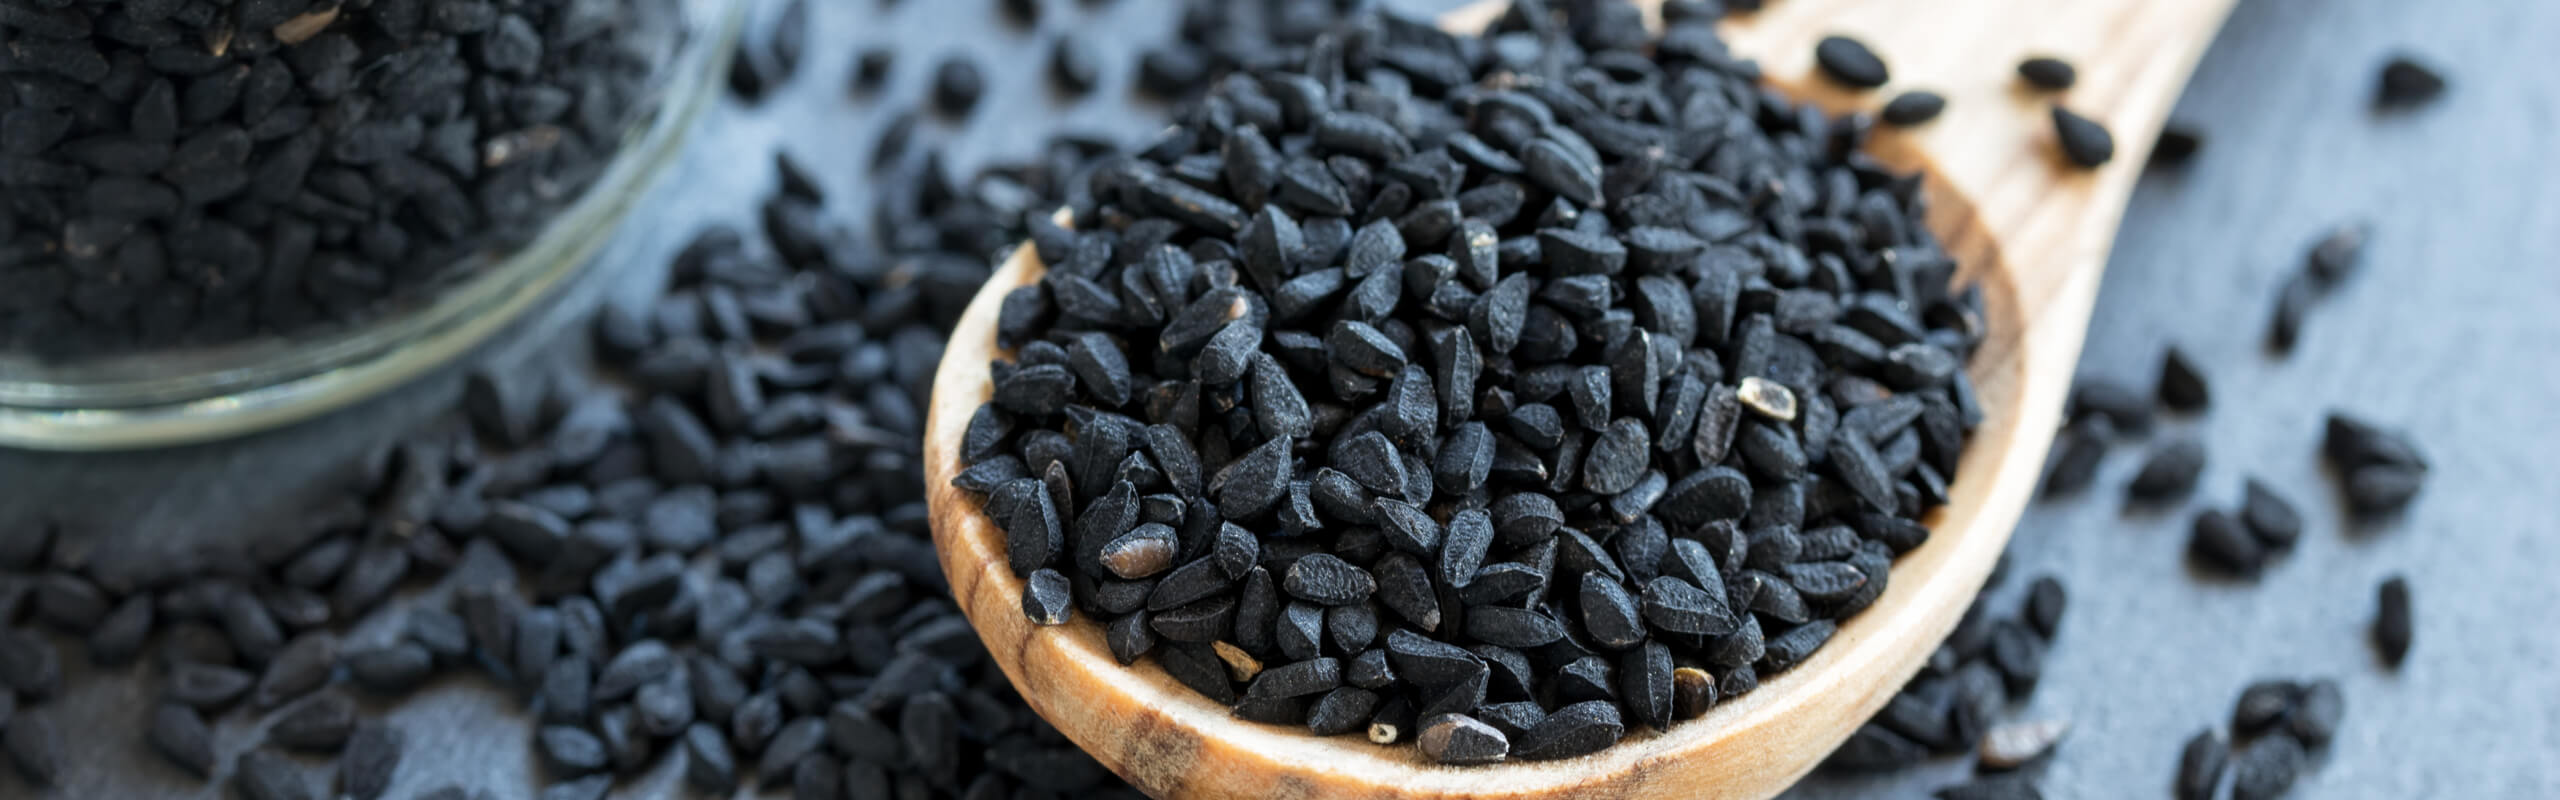 Black Cumin Seed Health Benefits WholisticMatters 32340 Hot Sex Picture picture